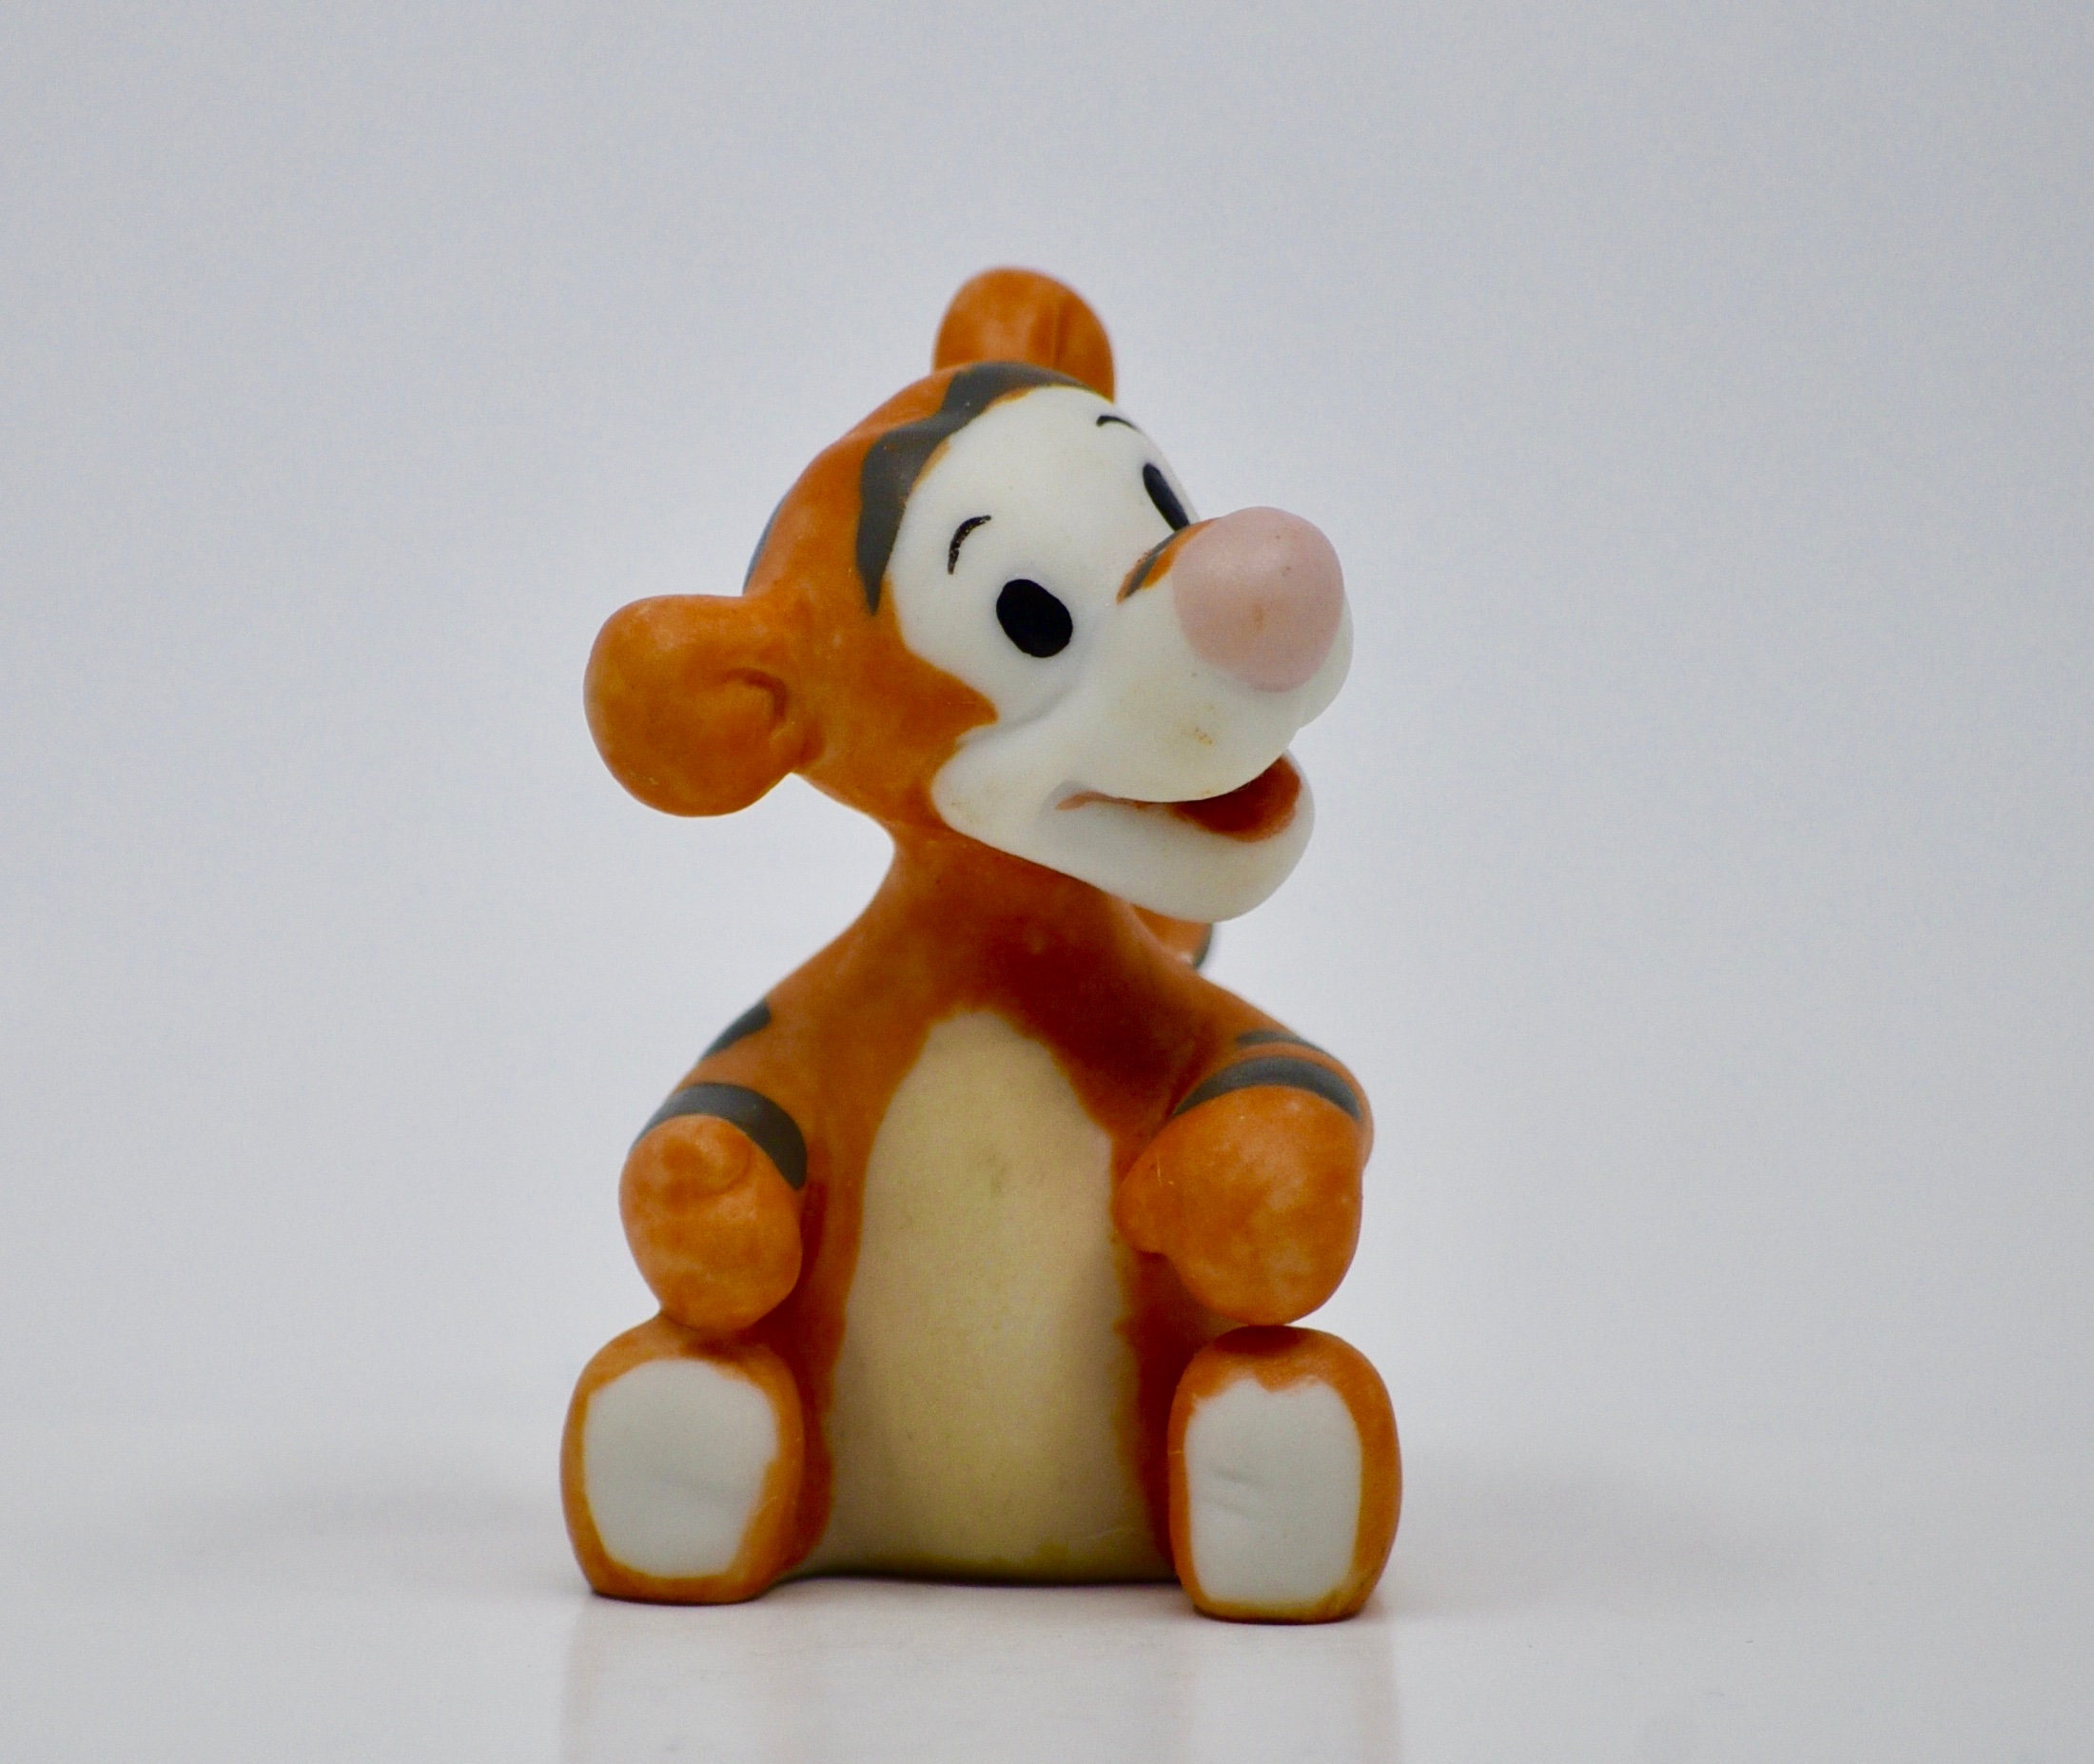 Disney /"Pooh and Friends/" Porcelain Figurine For Baby Sign